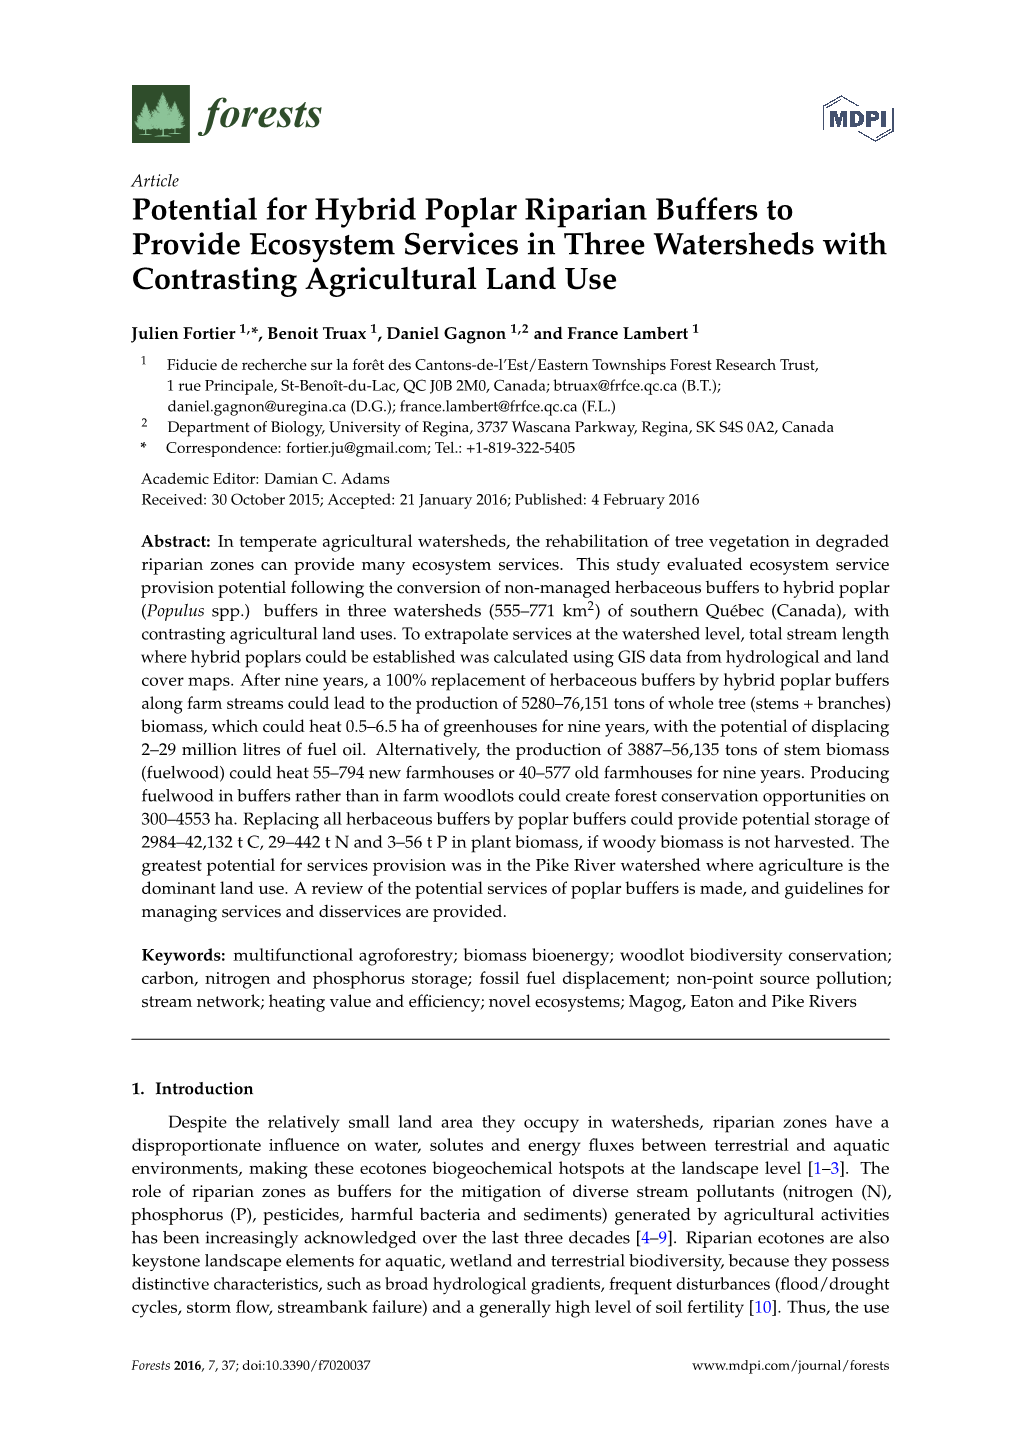 Potential for Hybrid Poplar Riparian Buffers to Provide Ecosystem Services in Three Watersheds with Contrasting Agricultural Land Use